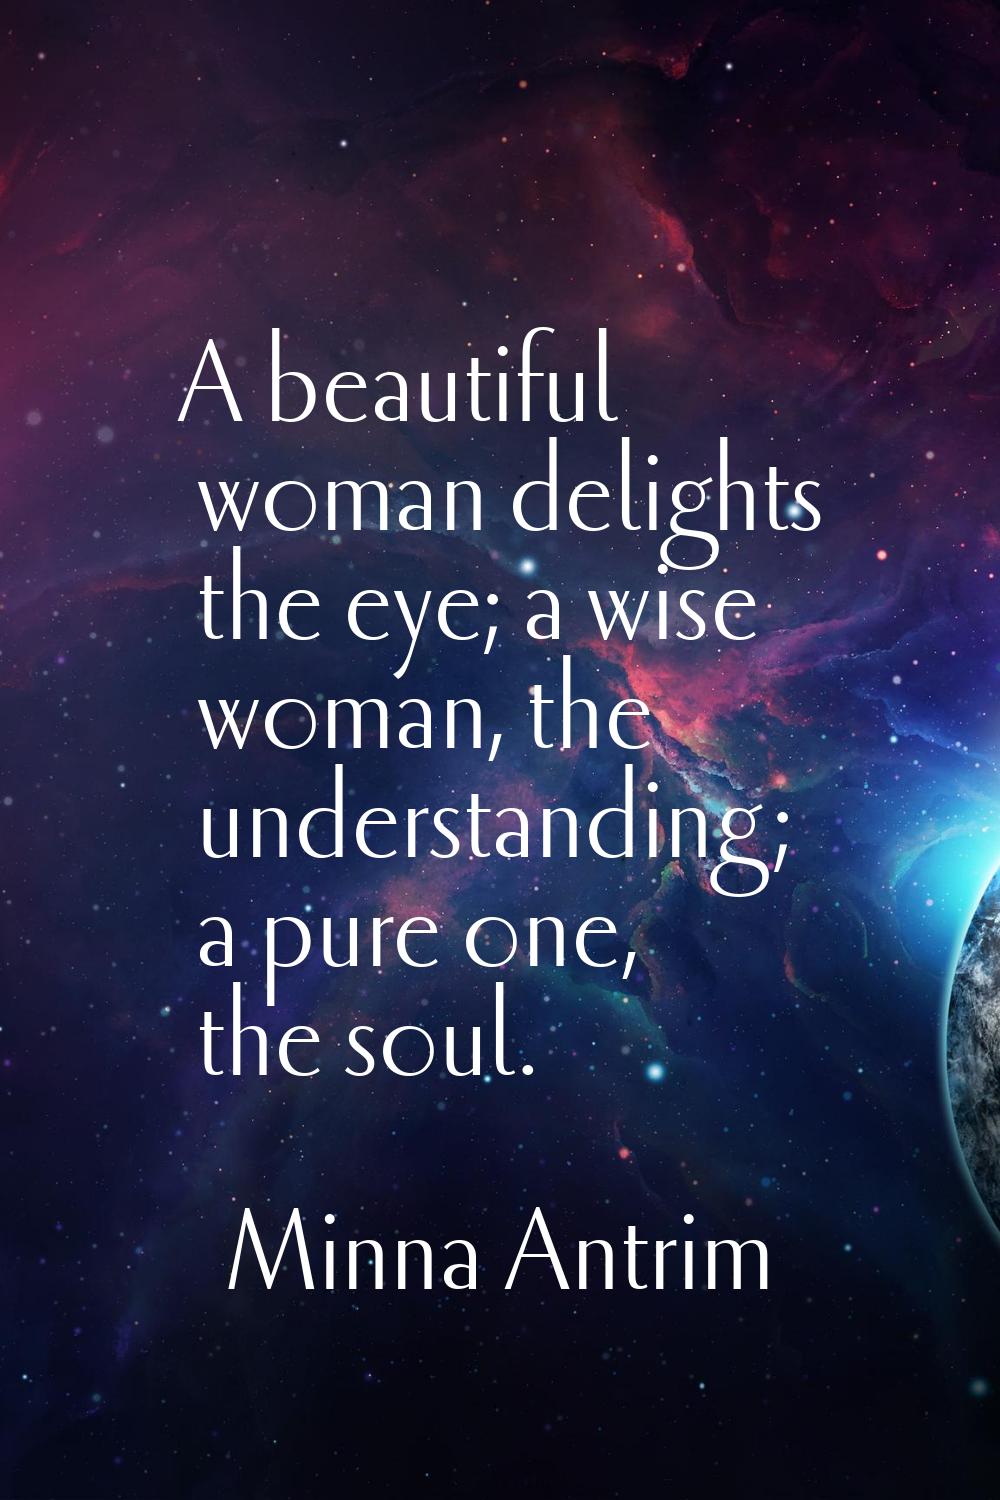 A beautiful woman delights the eye; a wise woman, the understanding; a pure one, the soul.